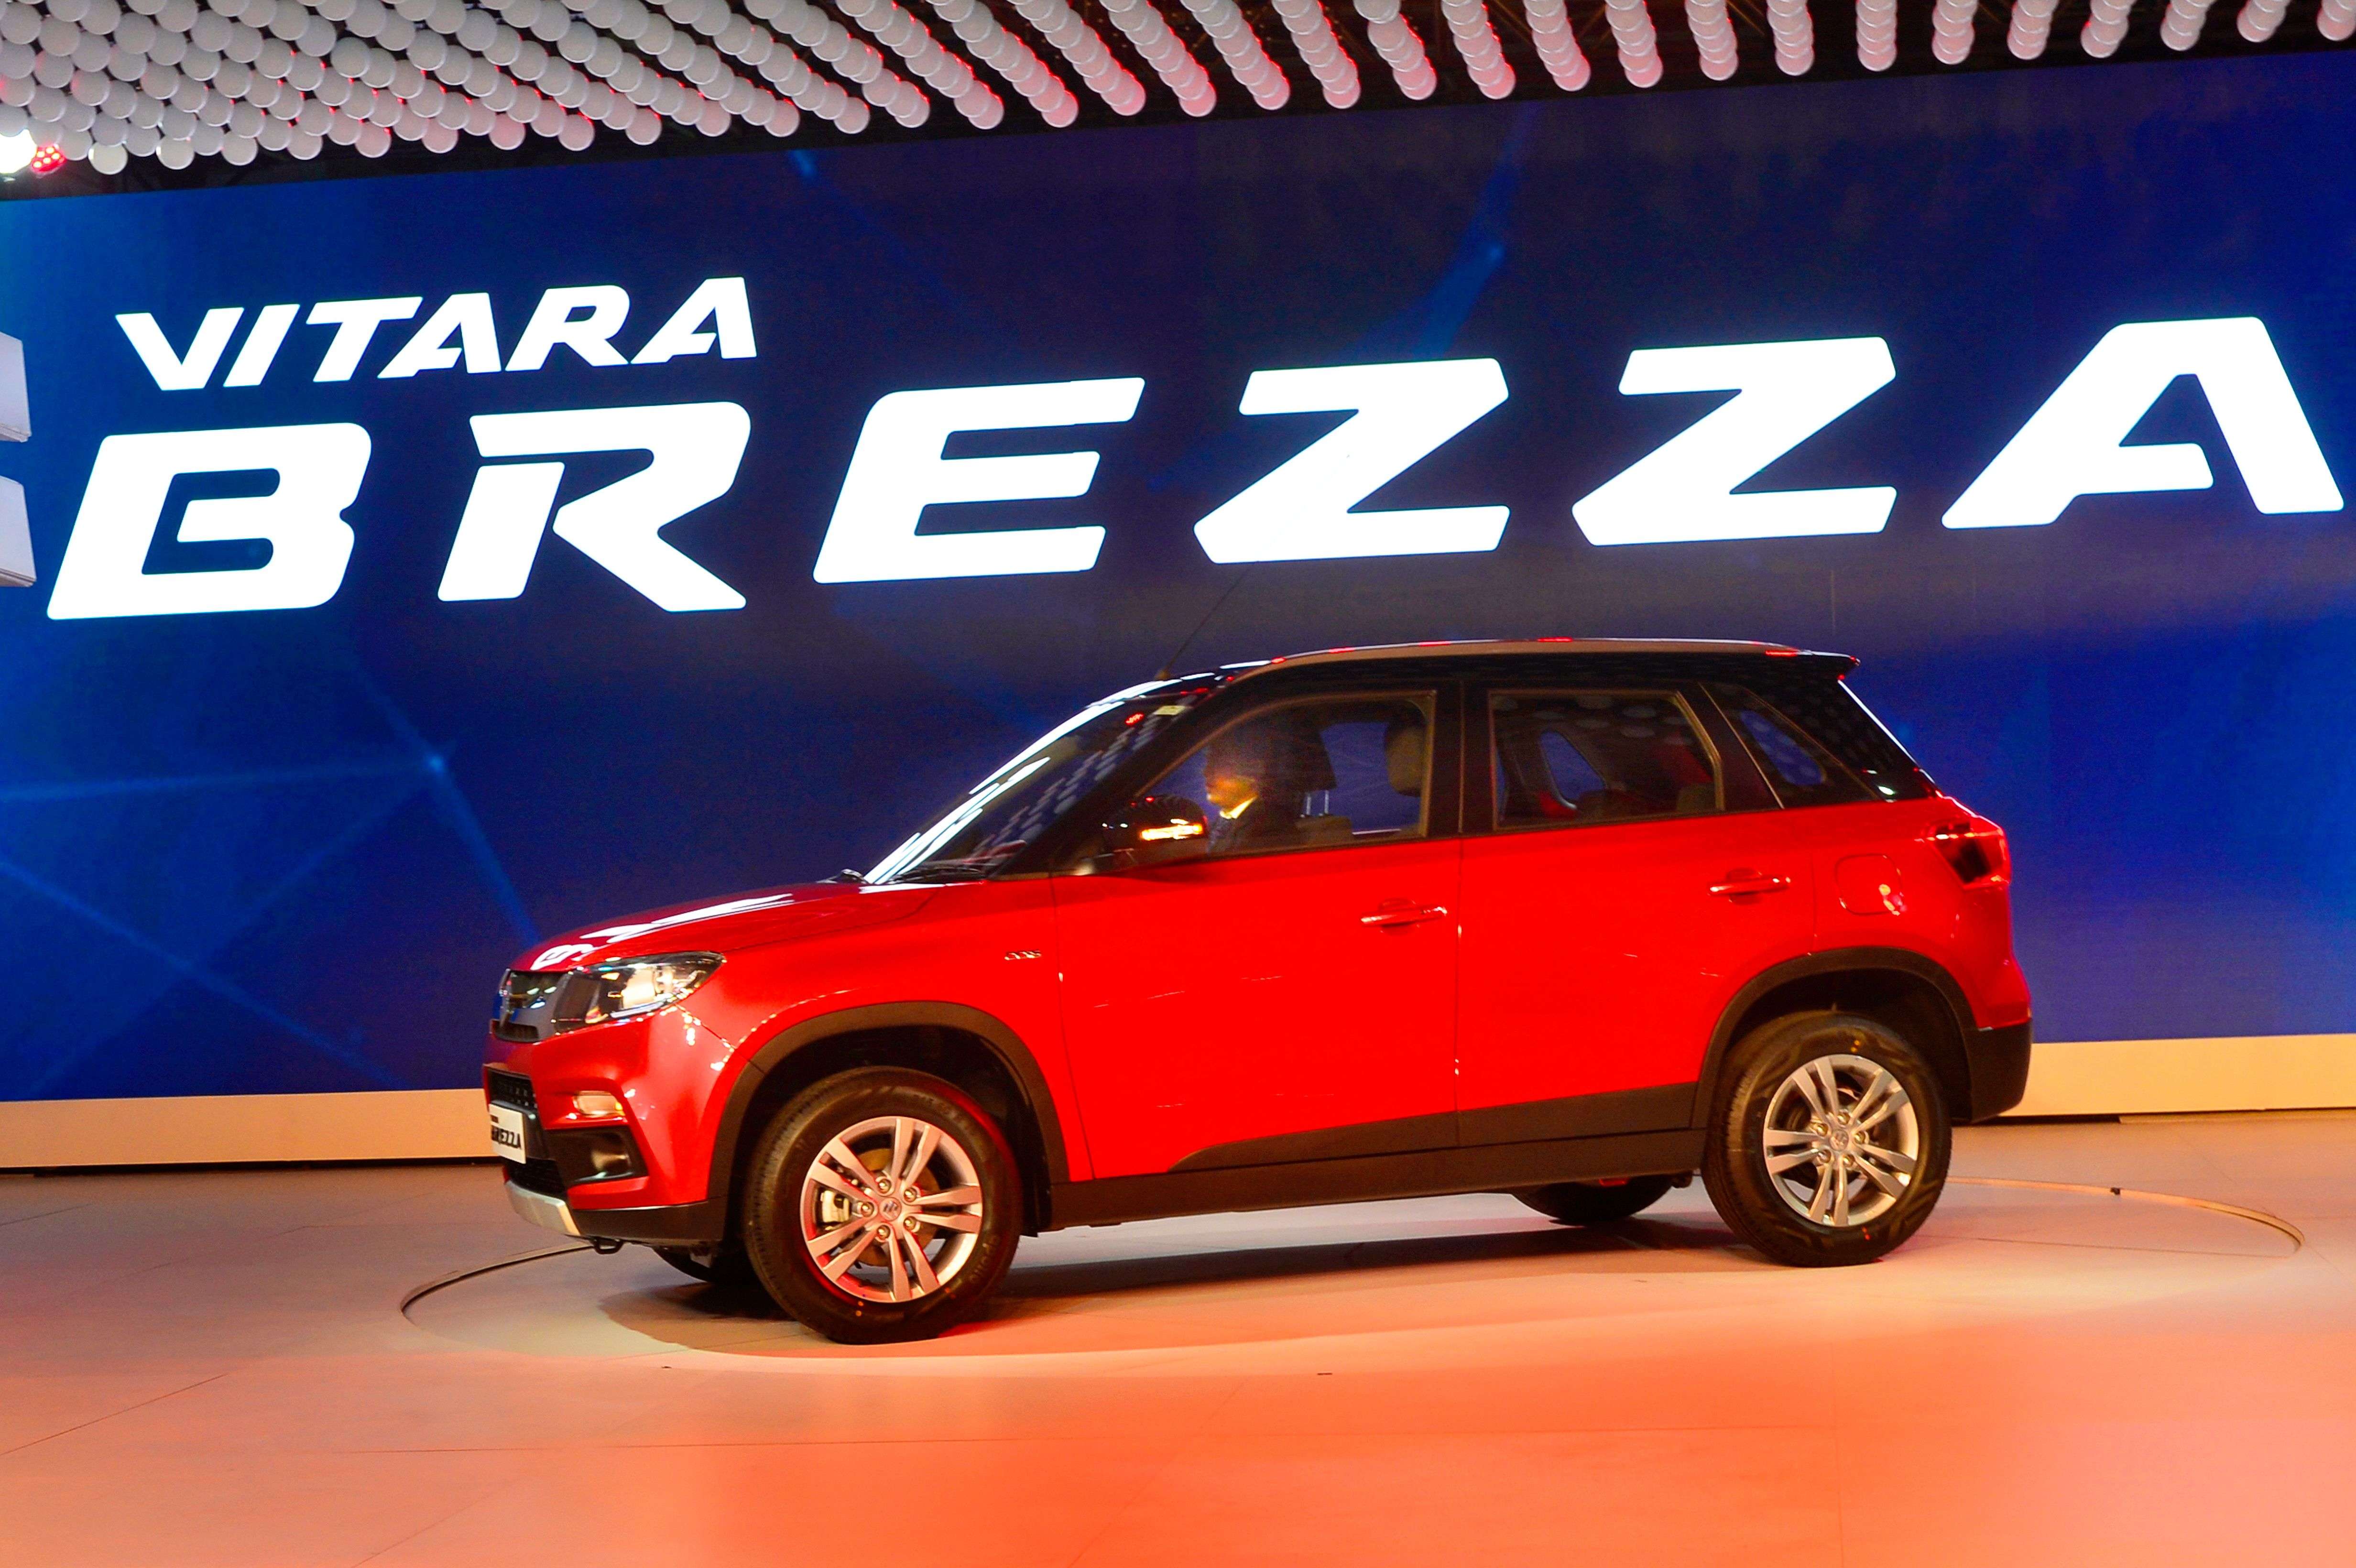 World launch of Vitara Brezza, a compact SUV, at the Auto Expo in Greater Noida, near New Delhi.------------------PIC BY ANINDYA CHATTOPADHYAY